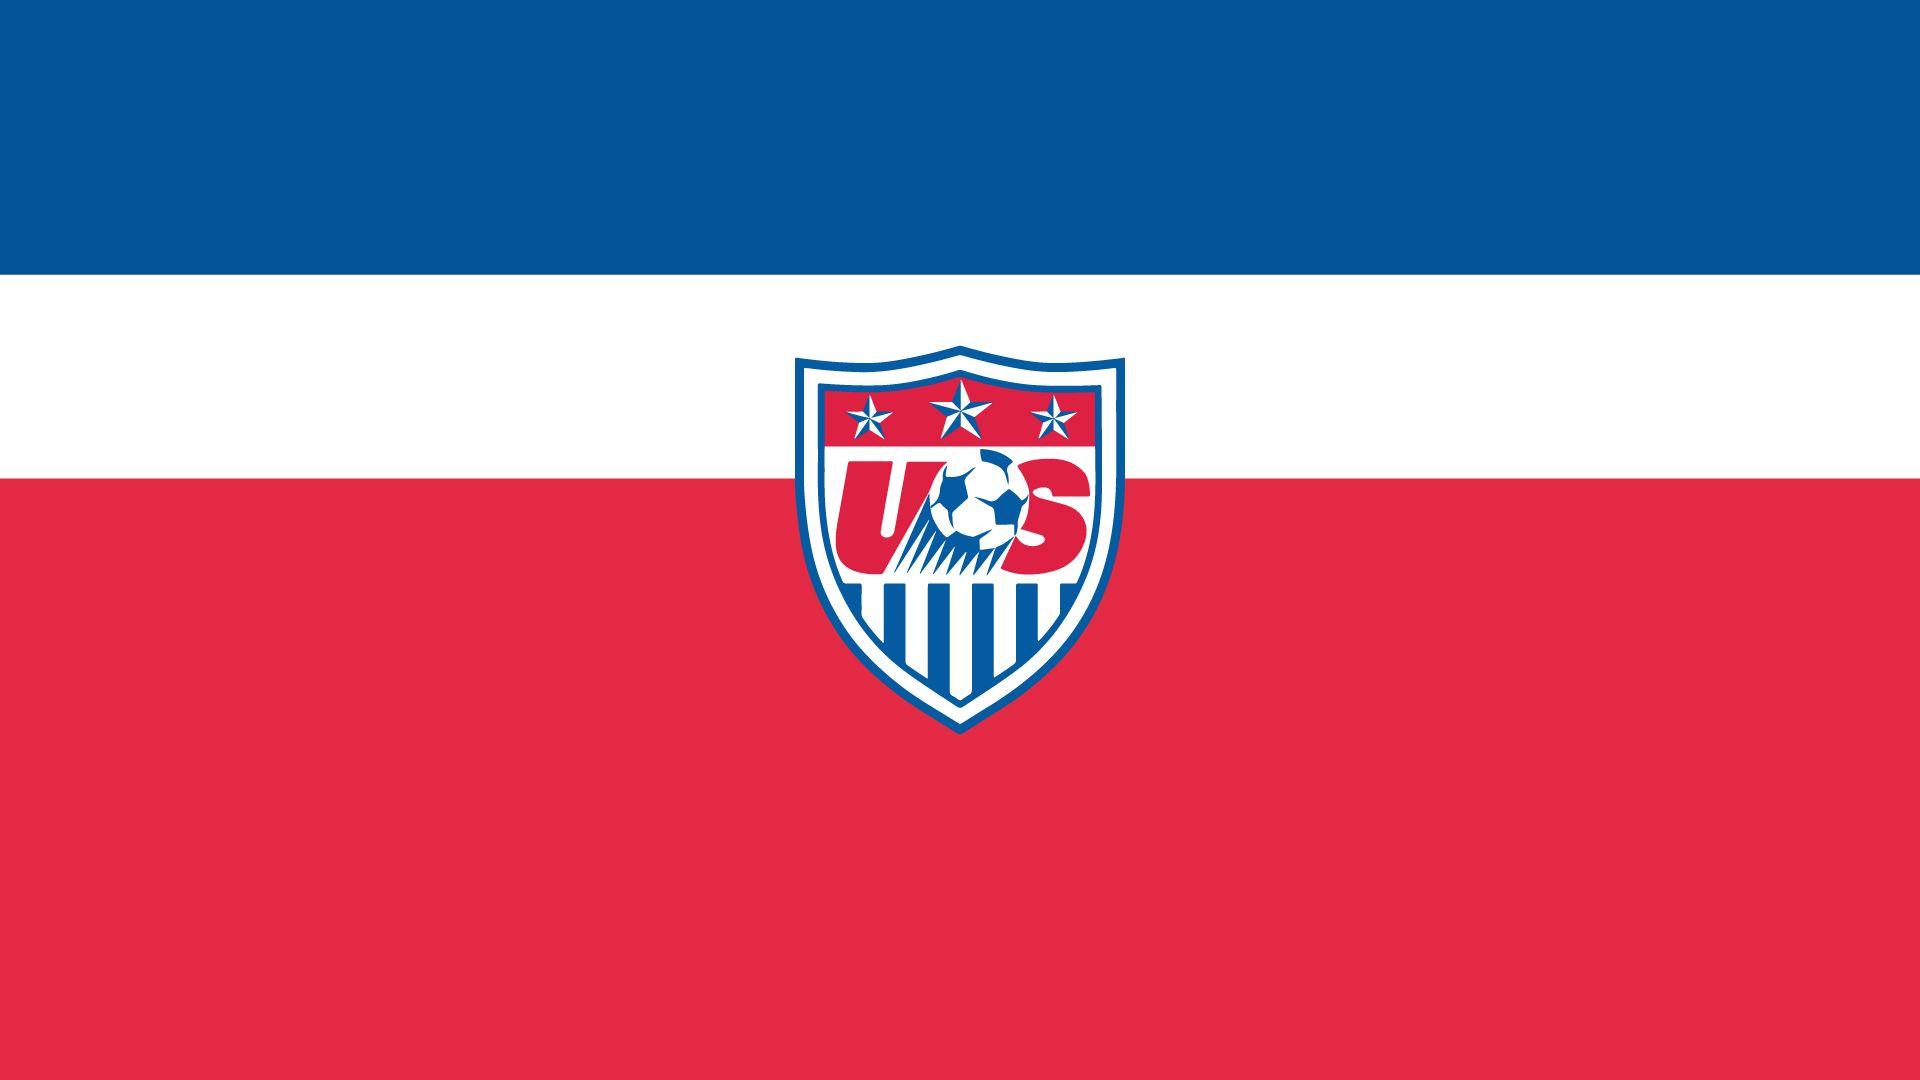 Image For > Usmnt 2014 Iphone Wallpapers